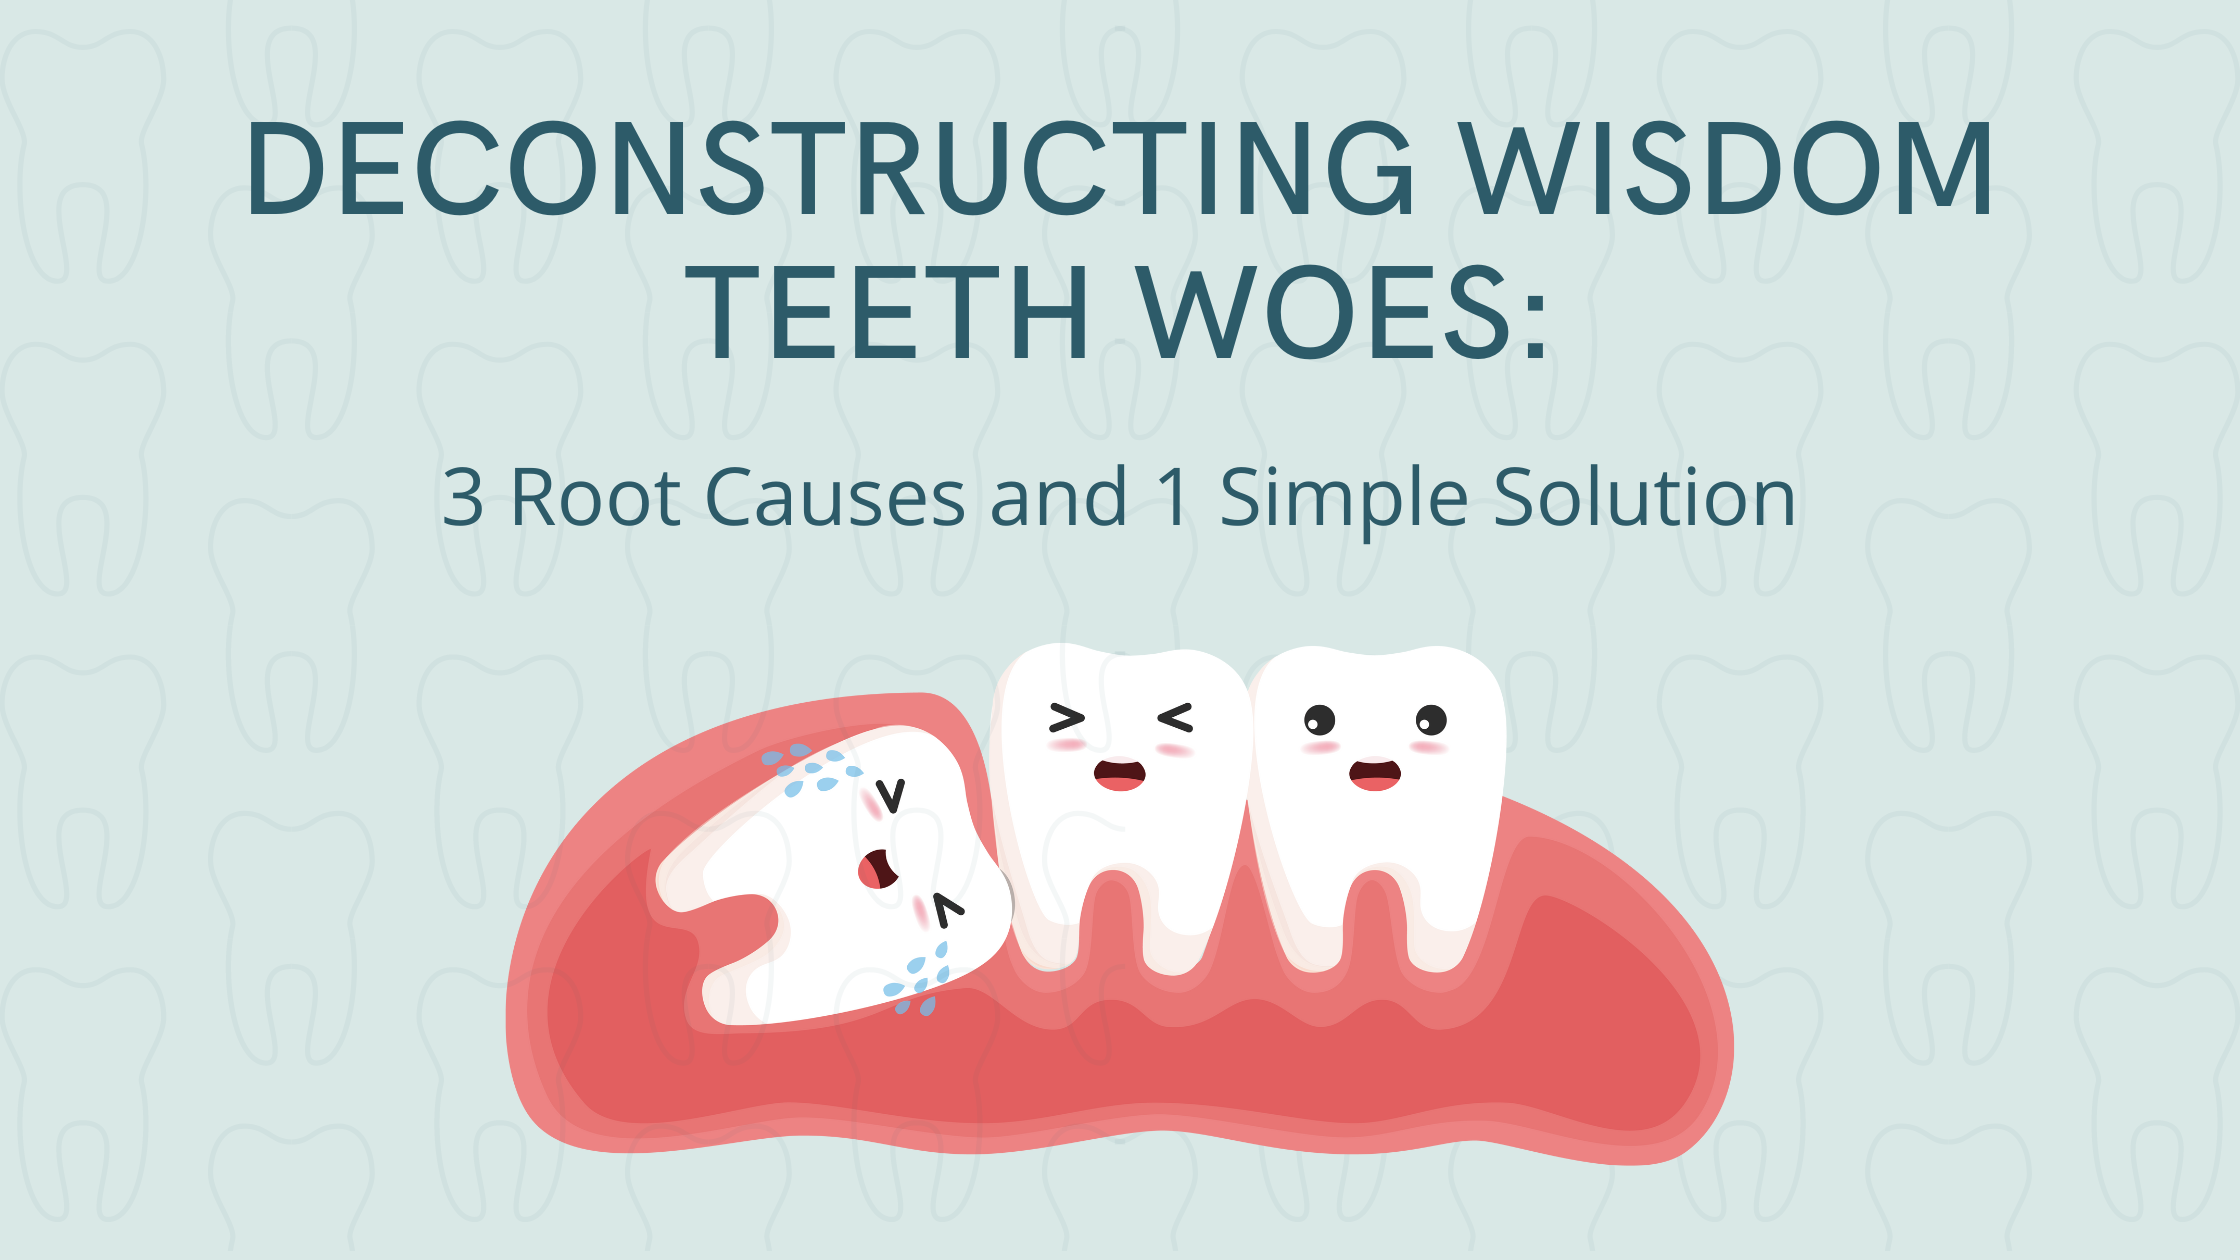 Deconstructing Wisdom Teeth Woes: 3 Root Causes and 1 Simple Solution